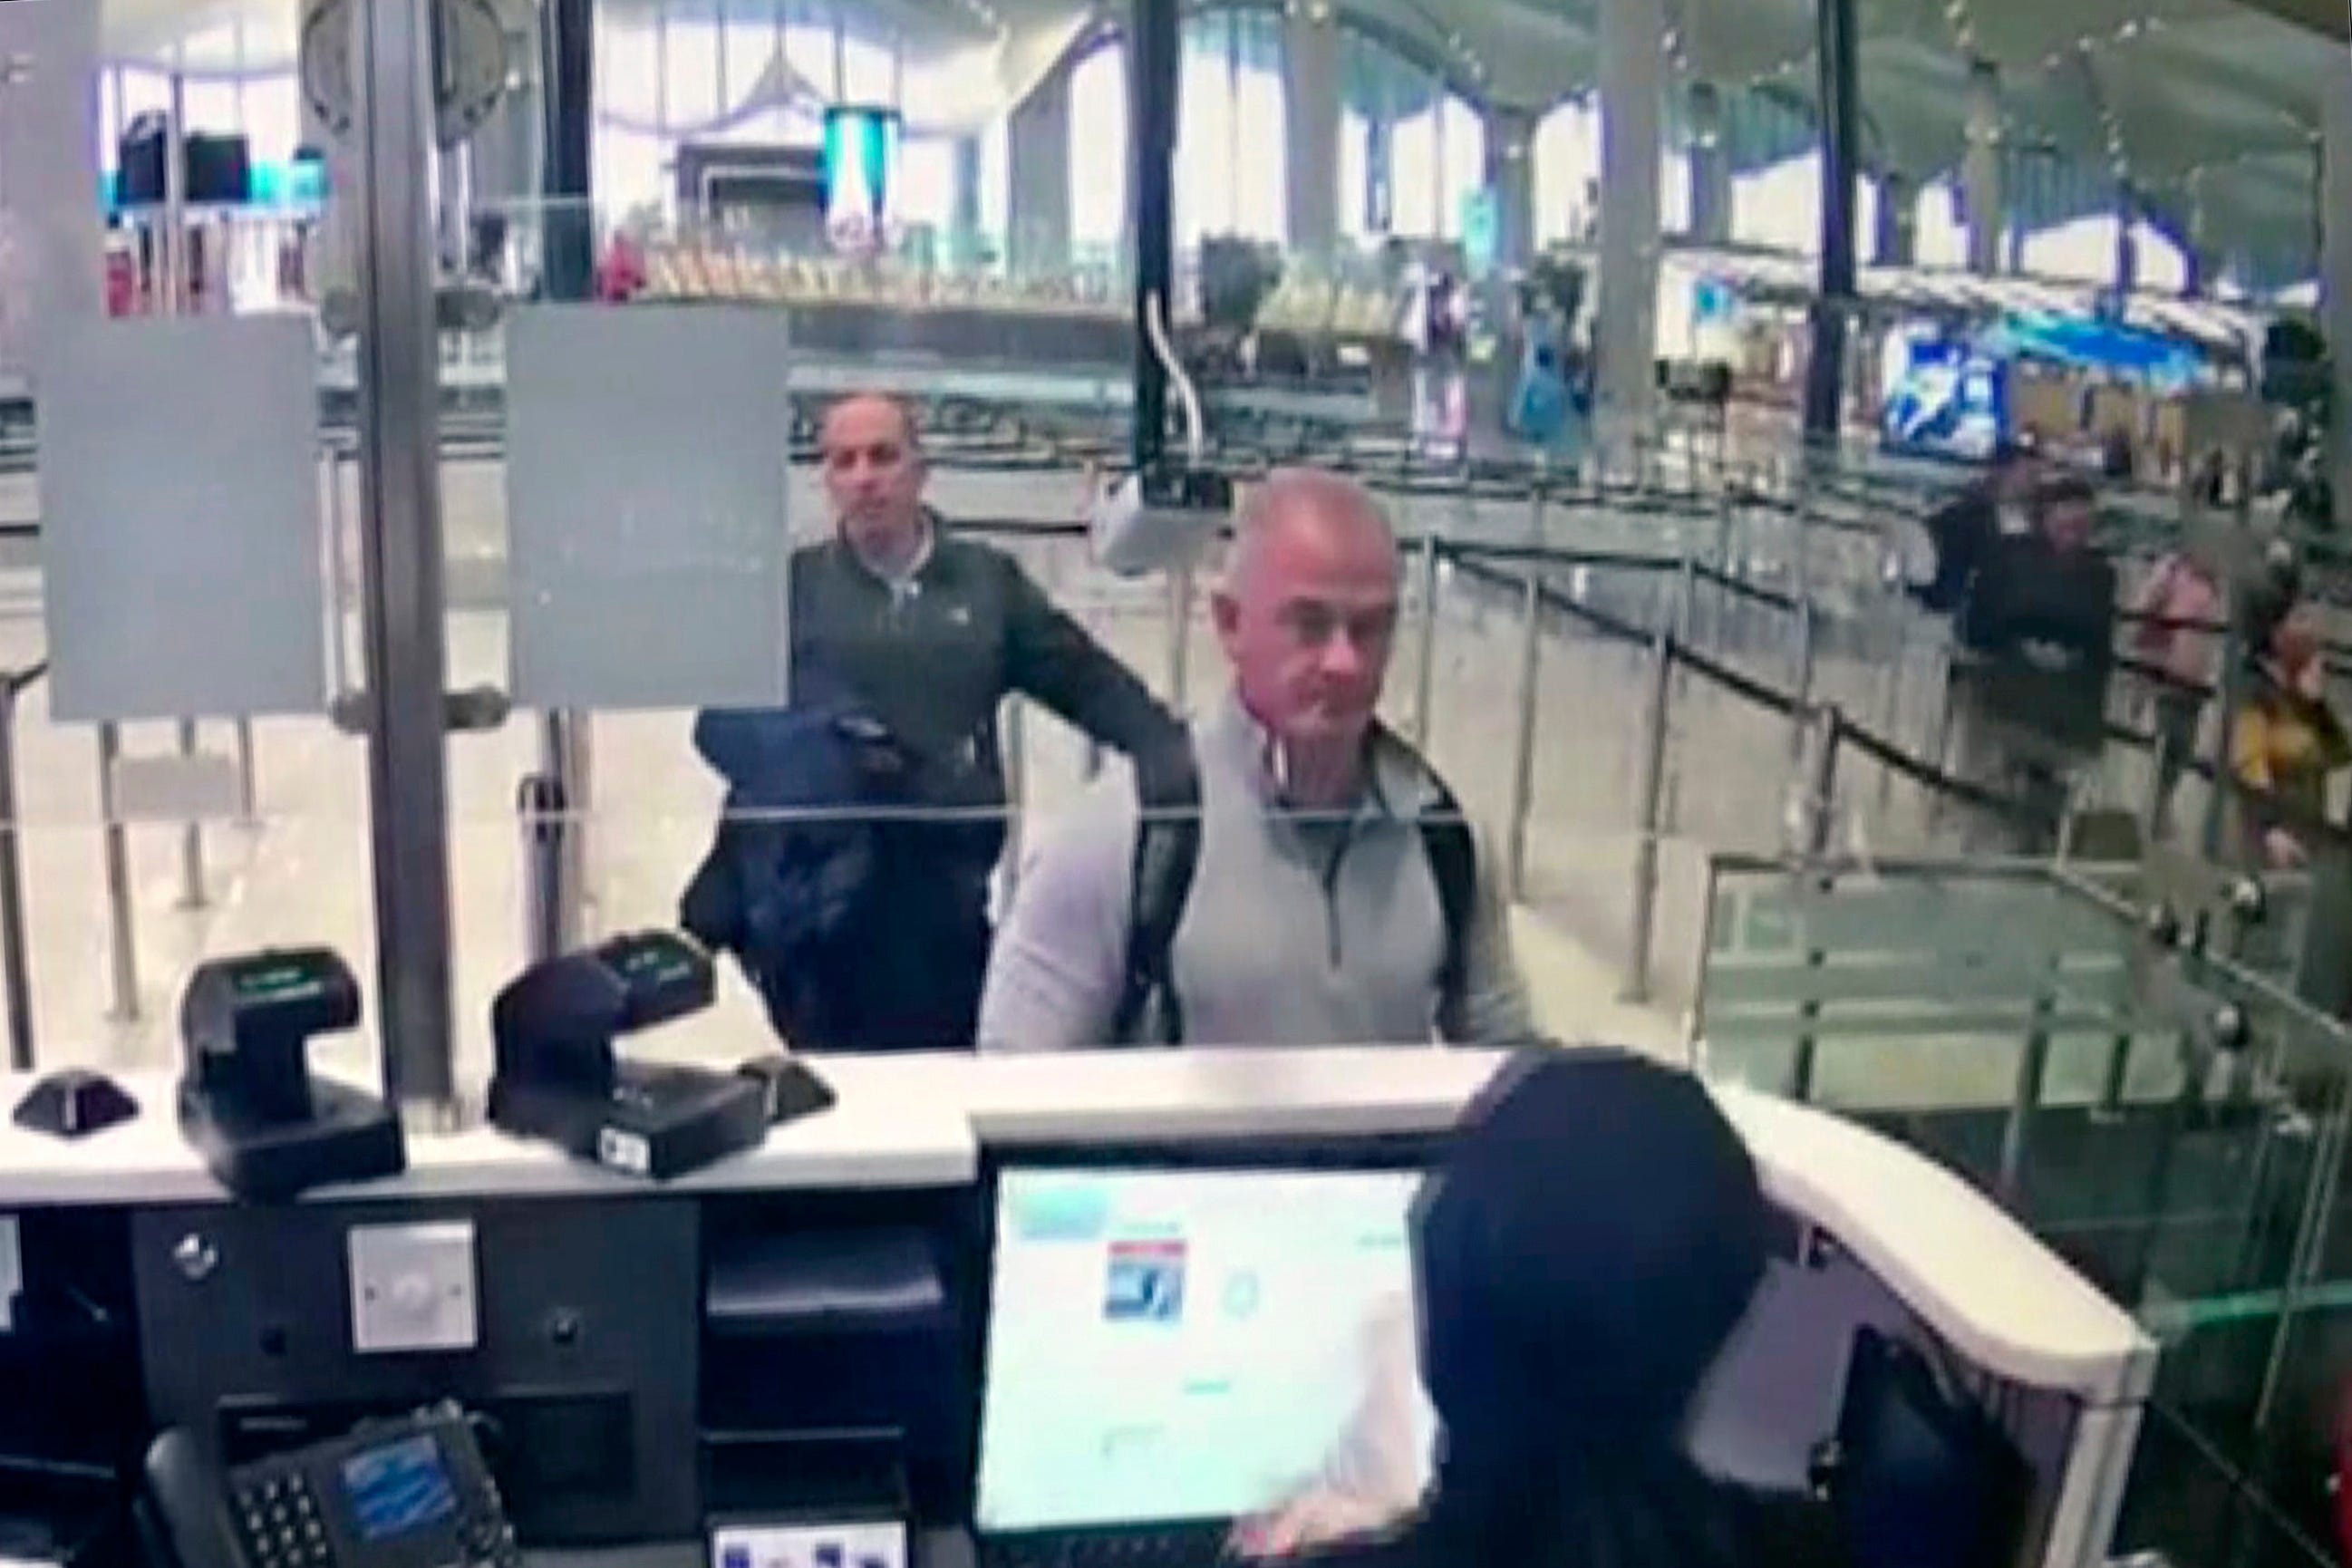 This Dec. 30, 2019 image from security camera video shows Michael L. Taylor, center, and George-Antoine Zayek at passport control at Istanbul Airport in Turkey.